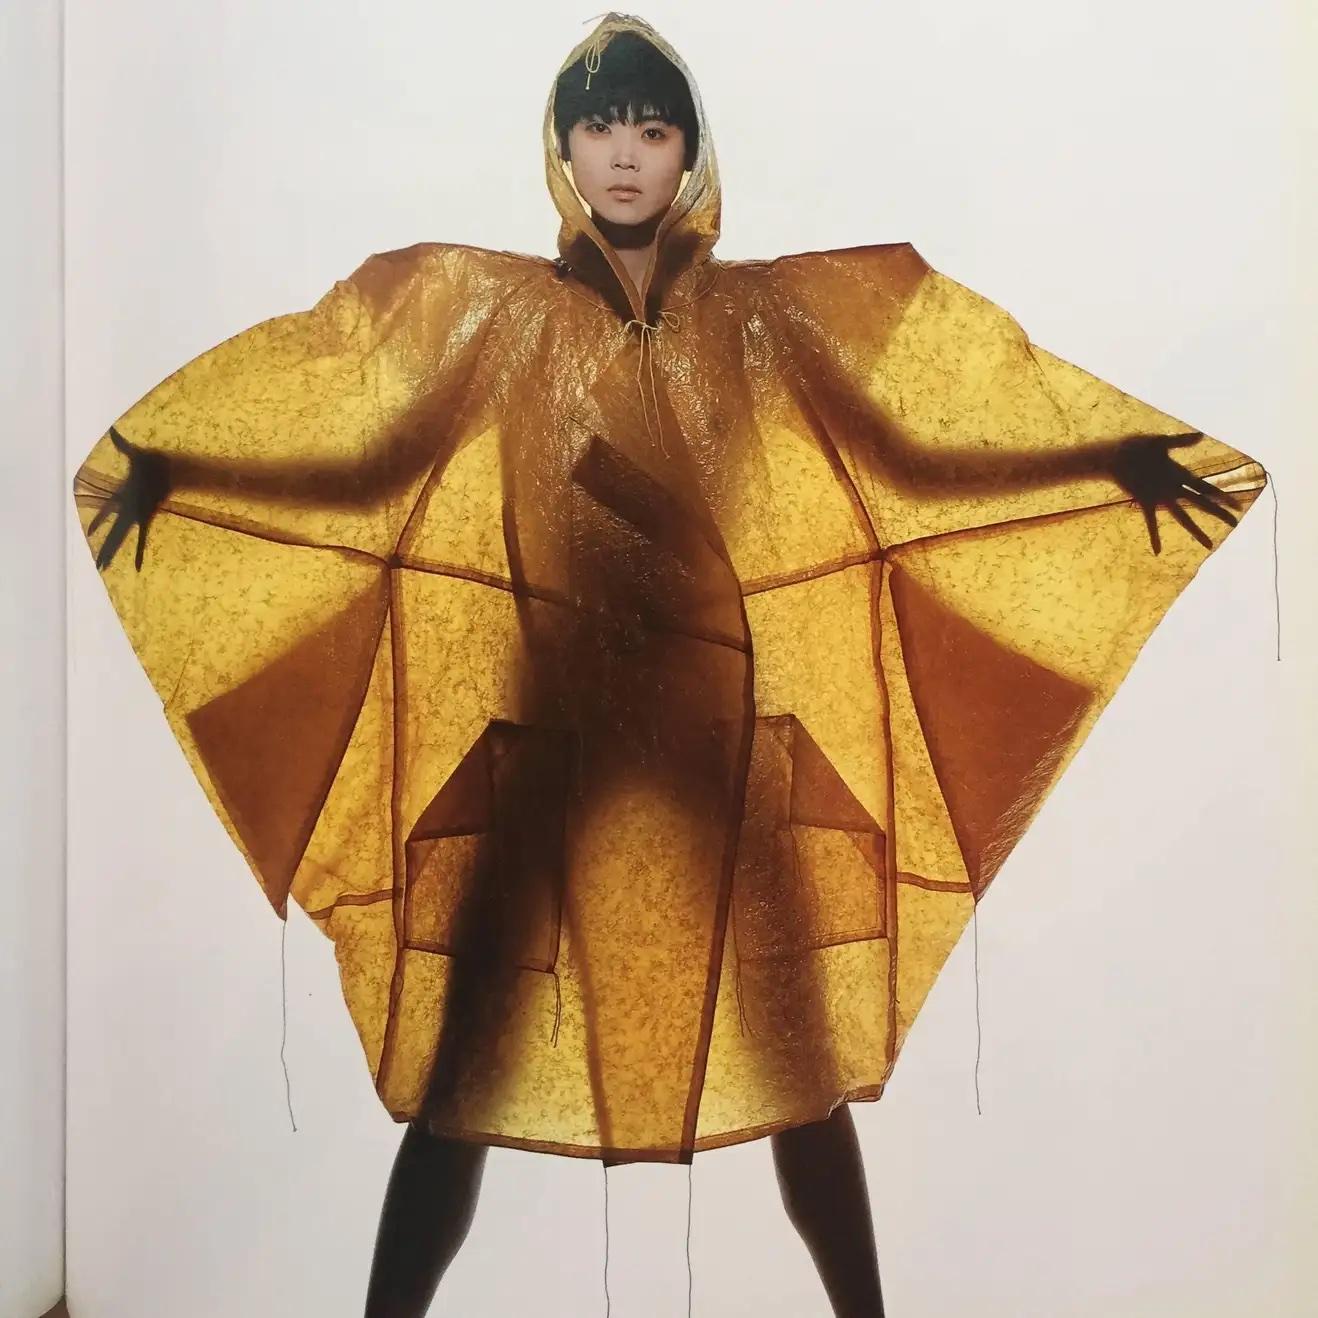 First edition, published by Little, Brown & Company, 1988.

Irving Penn captures the work of Issey Miyake, exploring the artistic relationship between Penn, one of the most prominent photographers of the 20th century, and Miyake, the iconic